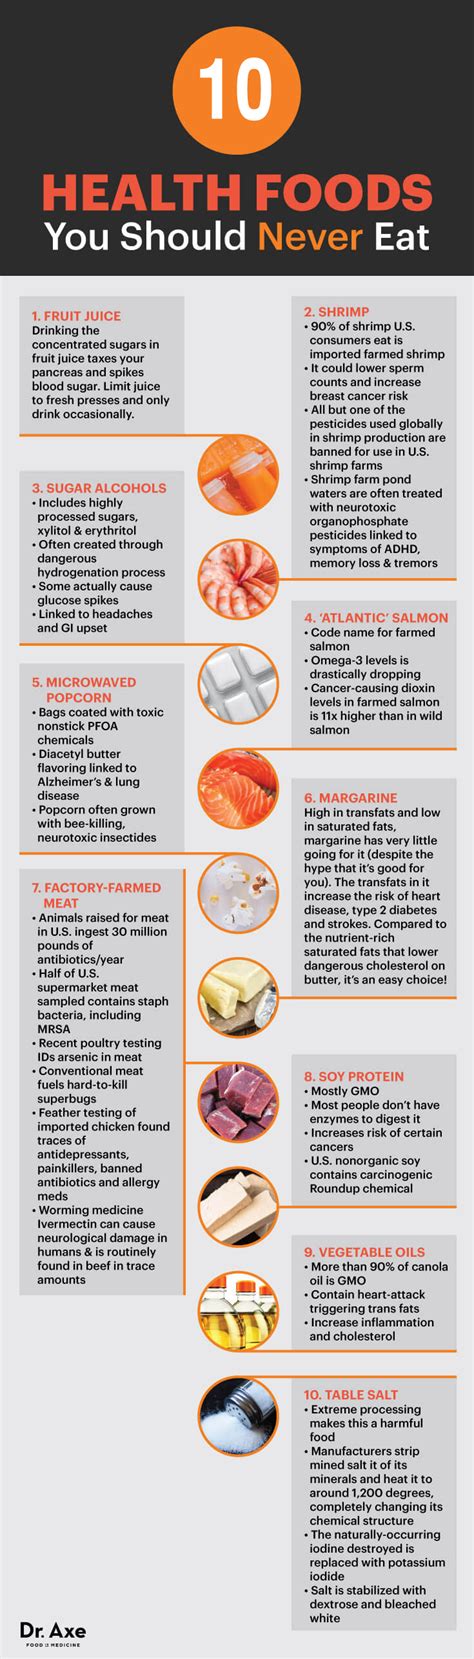 10 so called health foods you should never eat health food food health